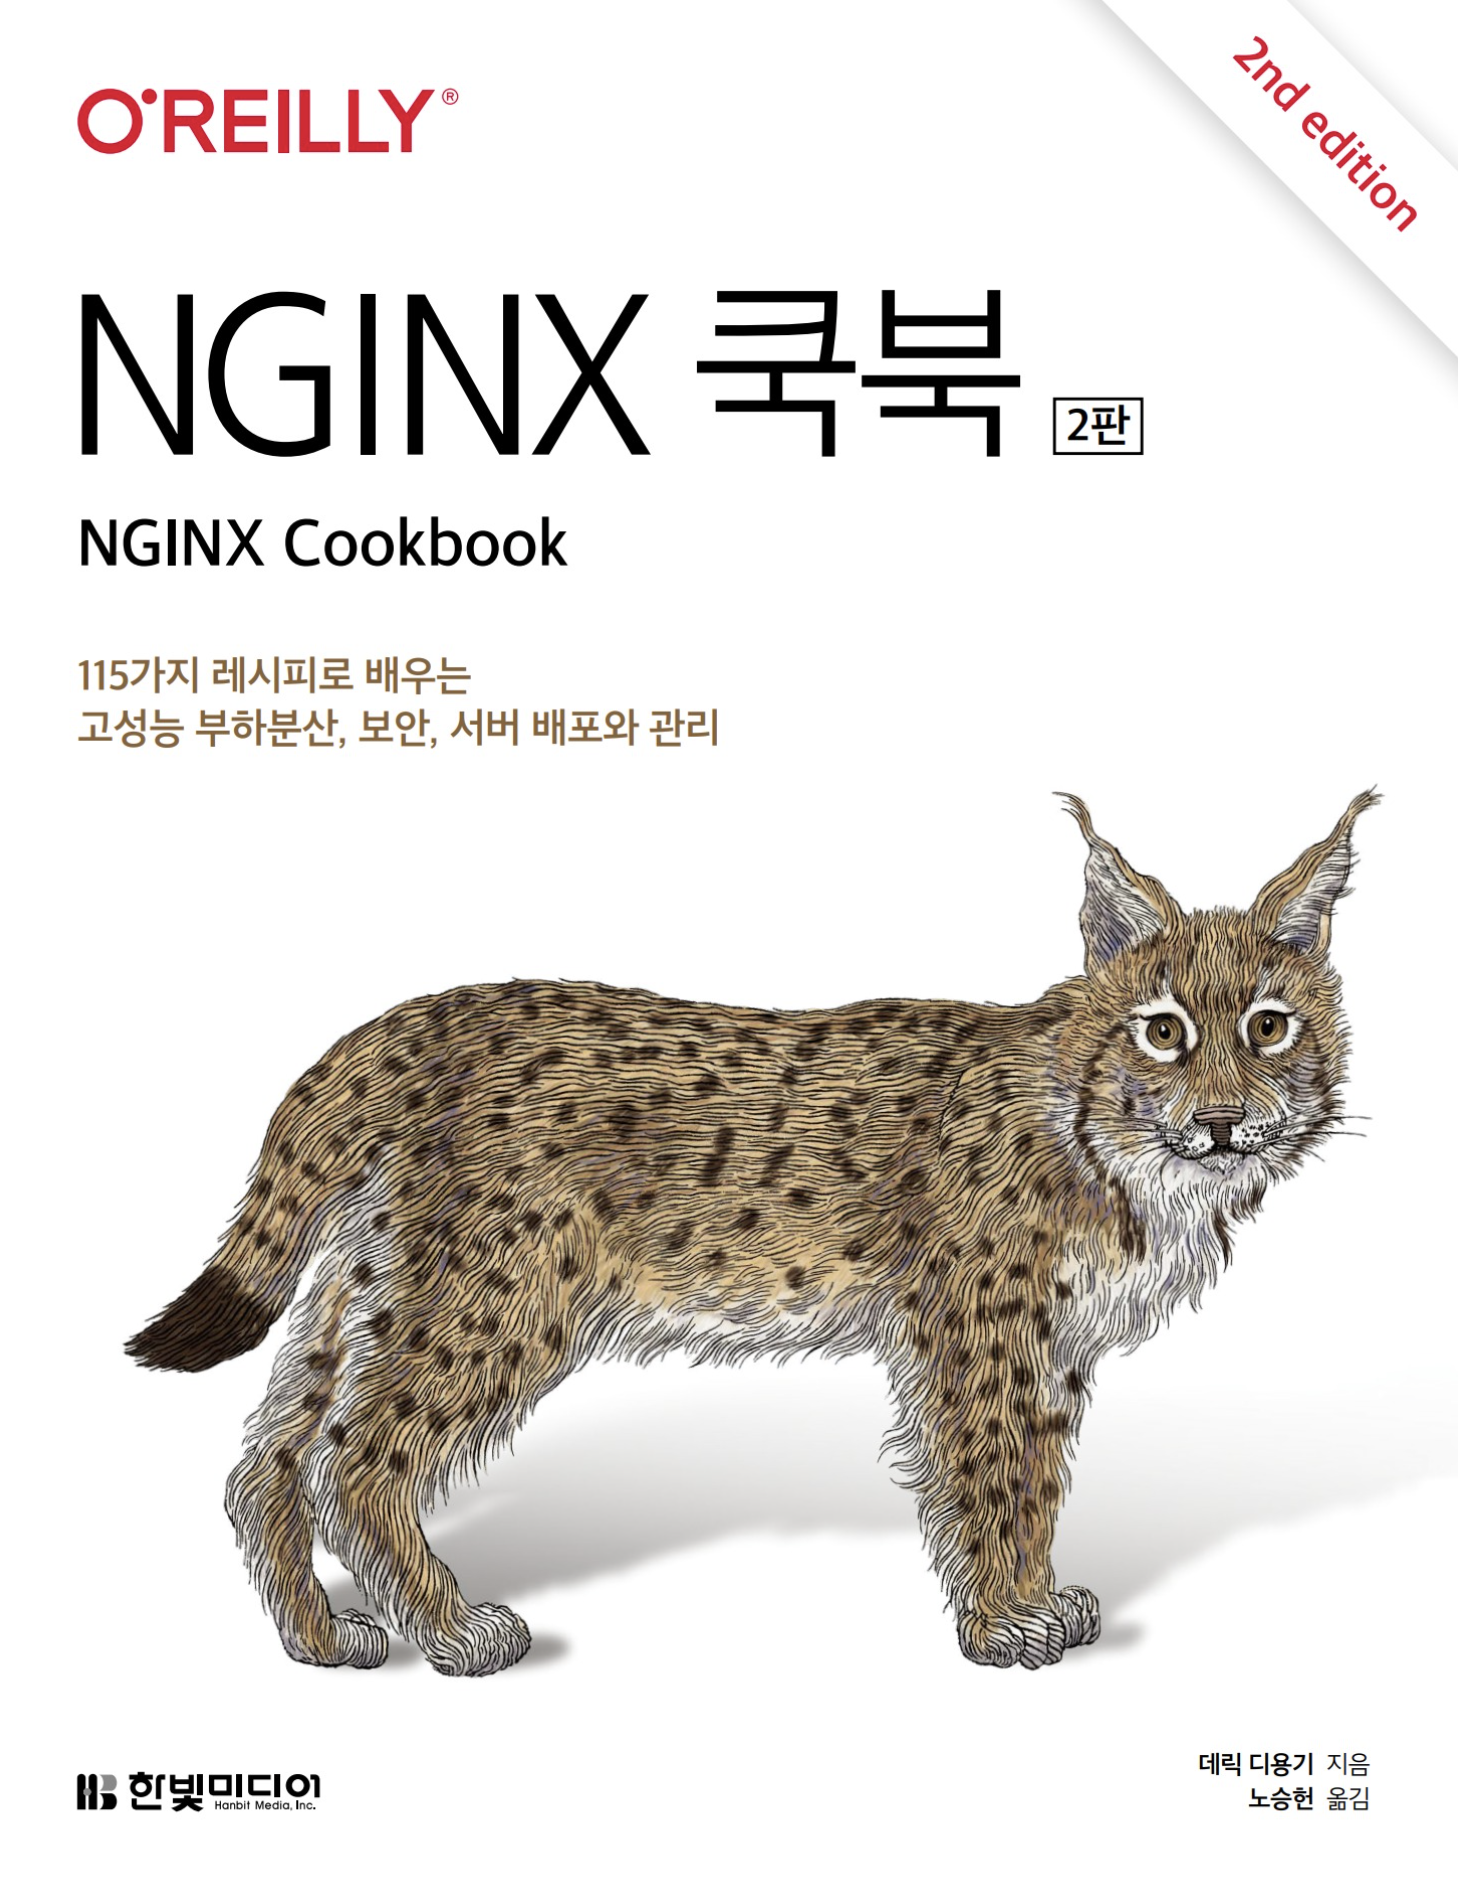 You are currently viewing NGINX 쿡북 (2판) 리뷰